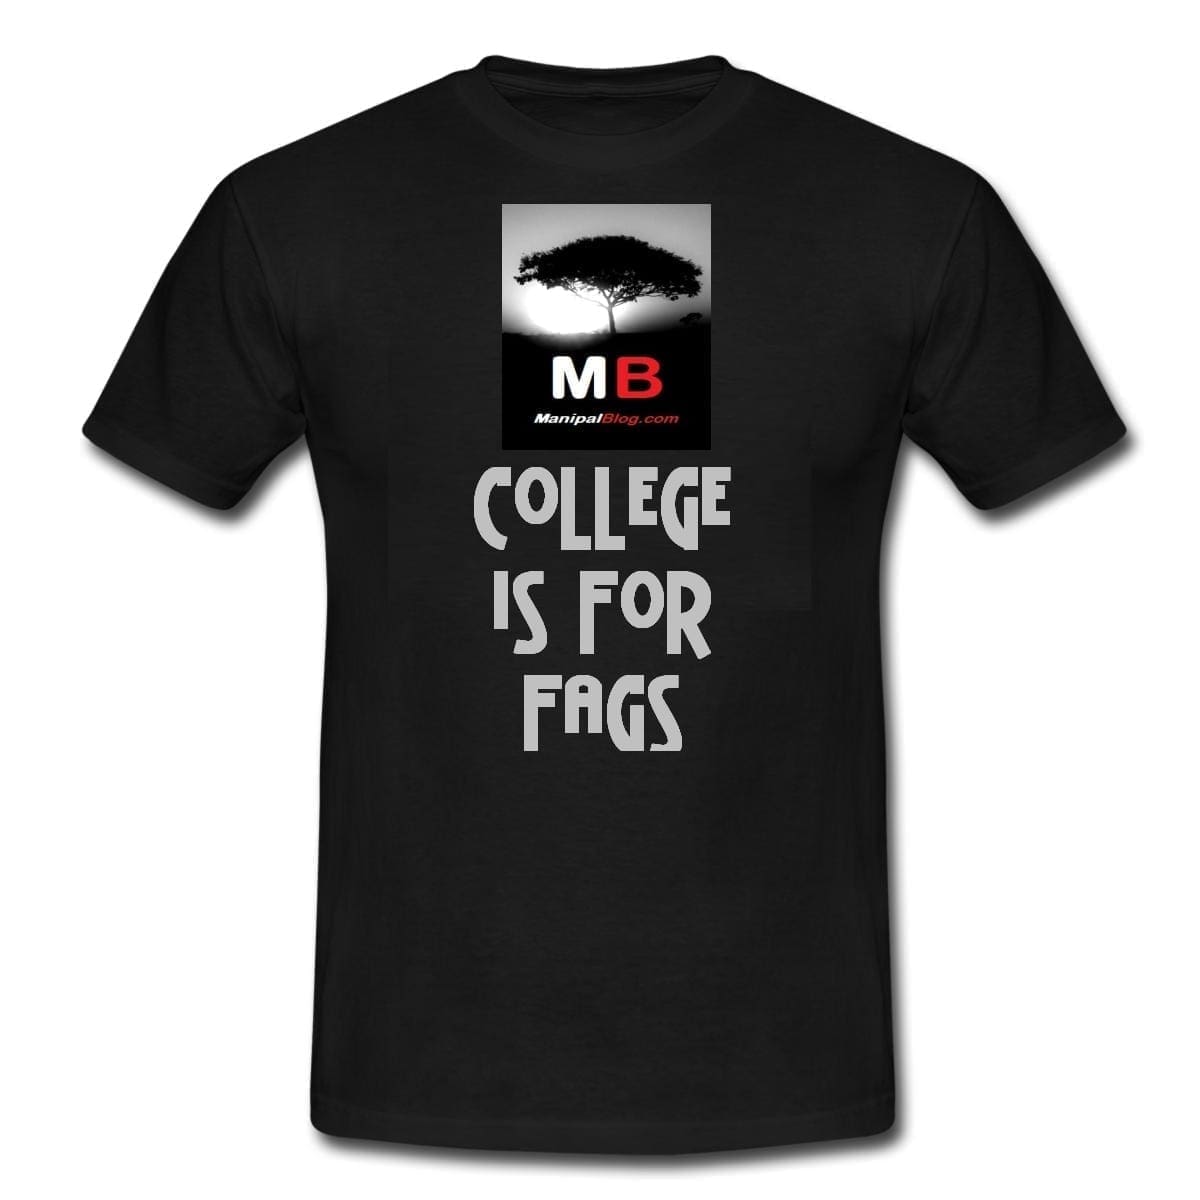 College-is-for-FAGS